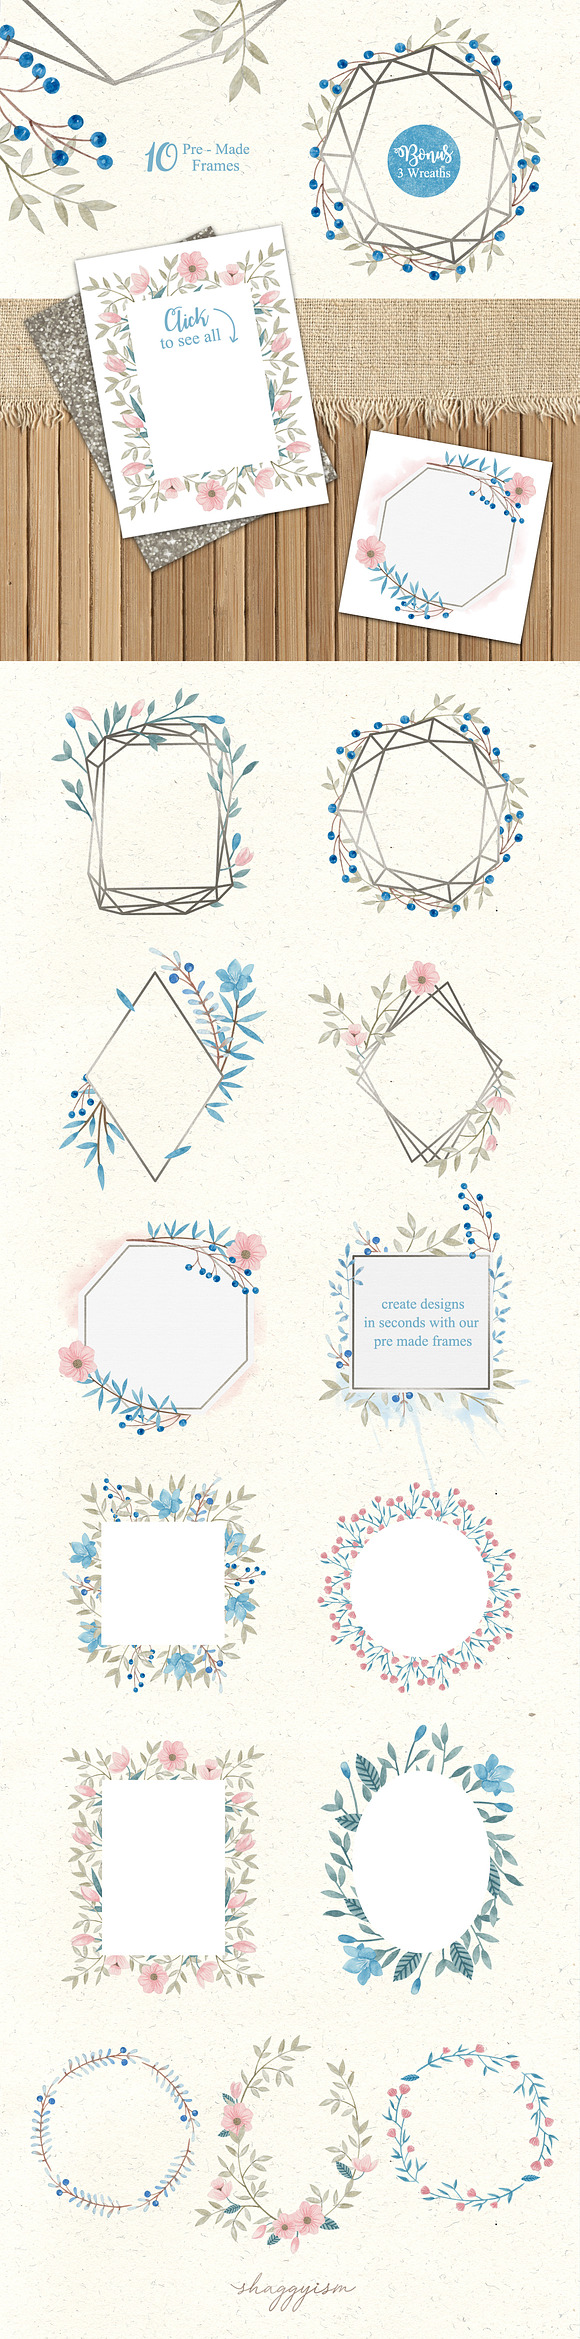 Geometric Play Silver Edition in Illustrations - product preview 3